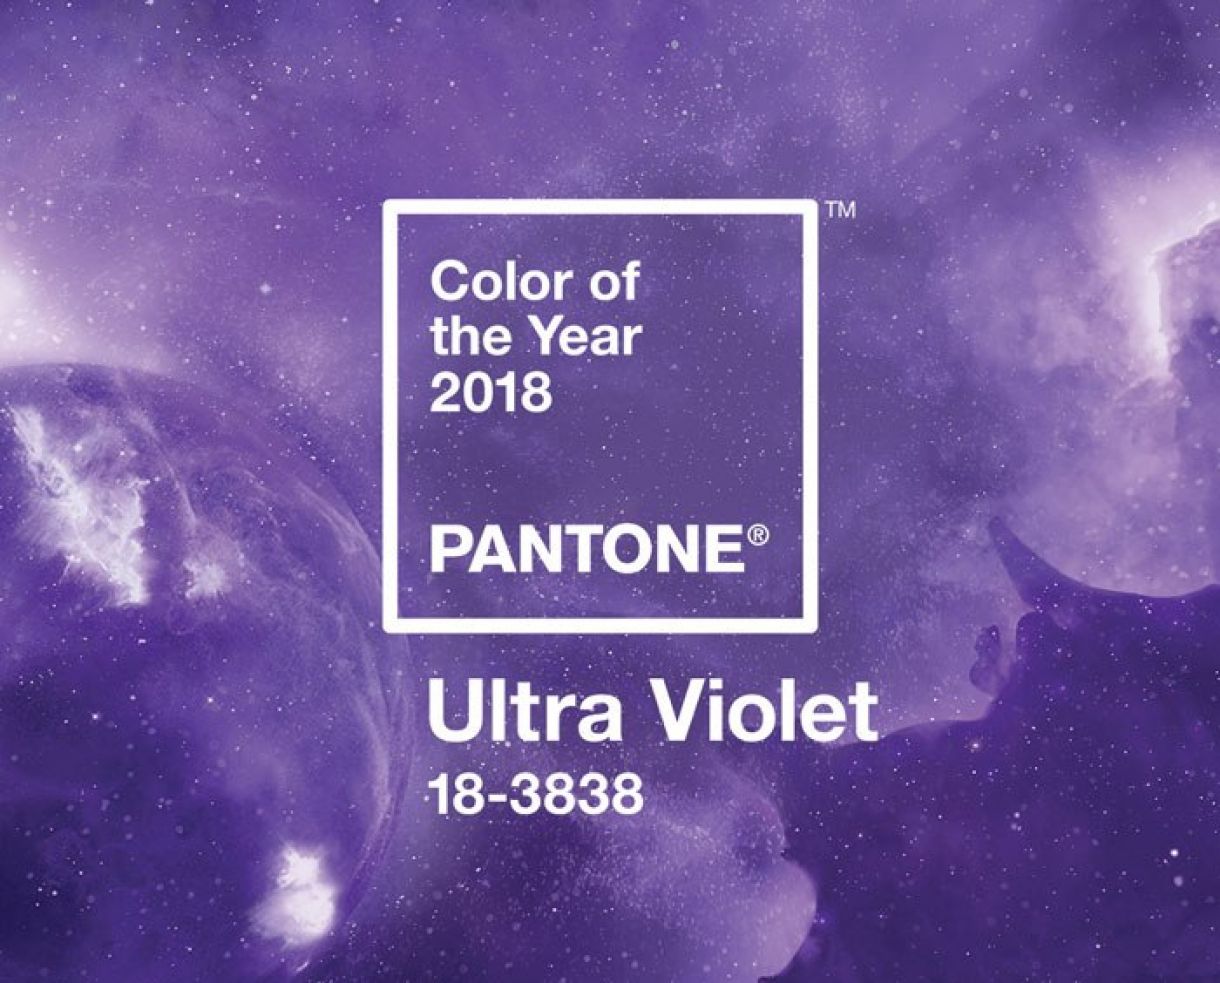 Pantone Color Of The Year 2018 Ultra Violet Banner Social